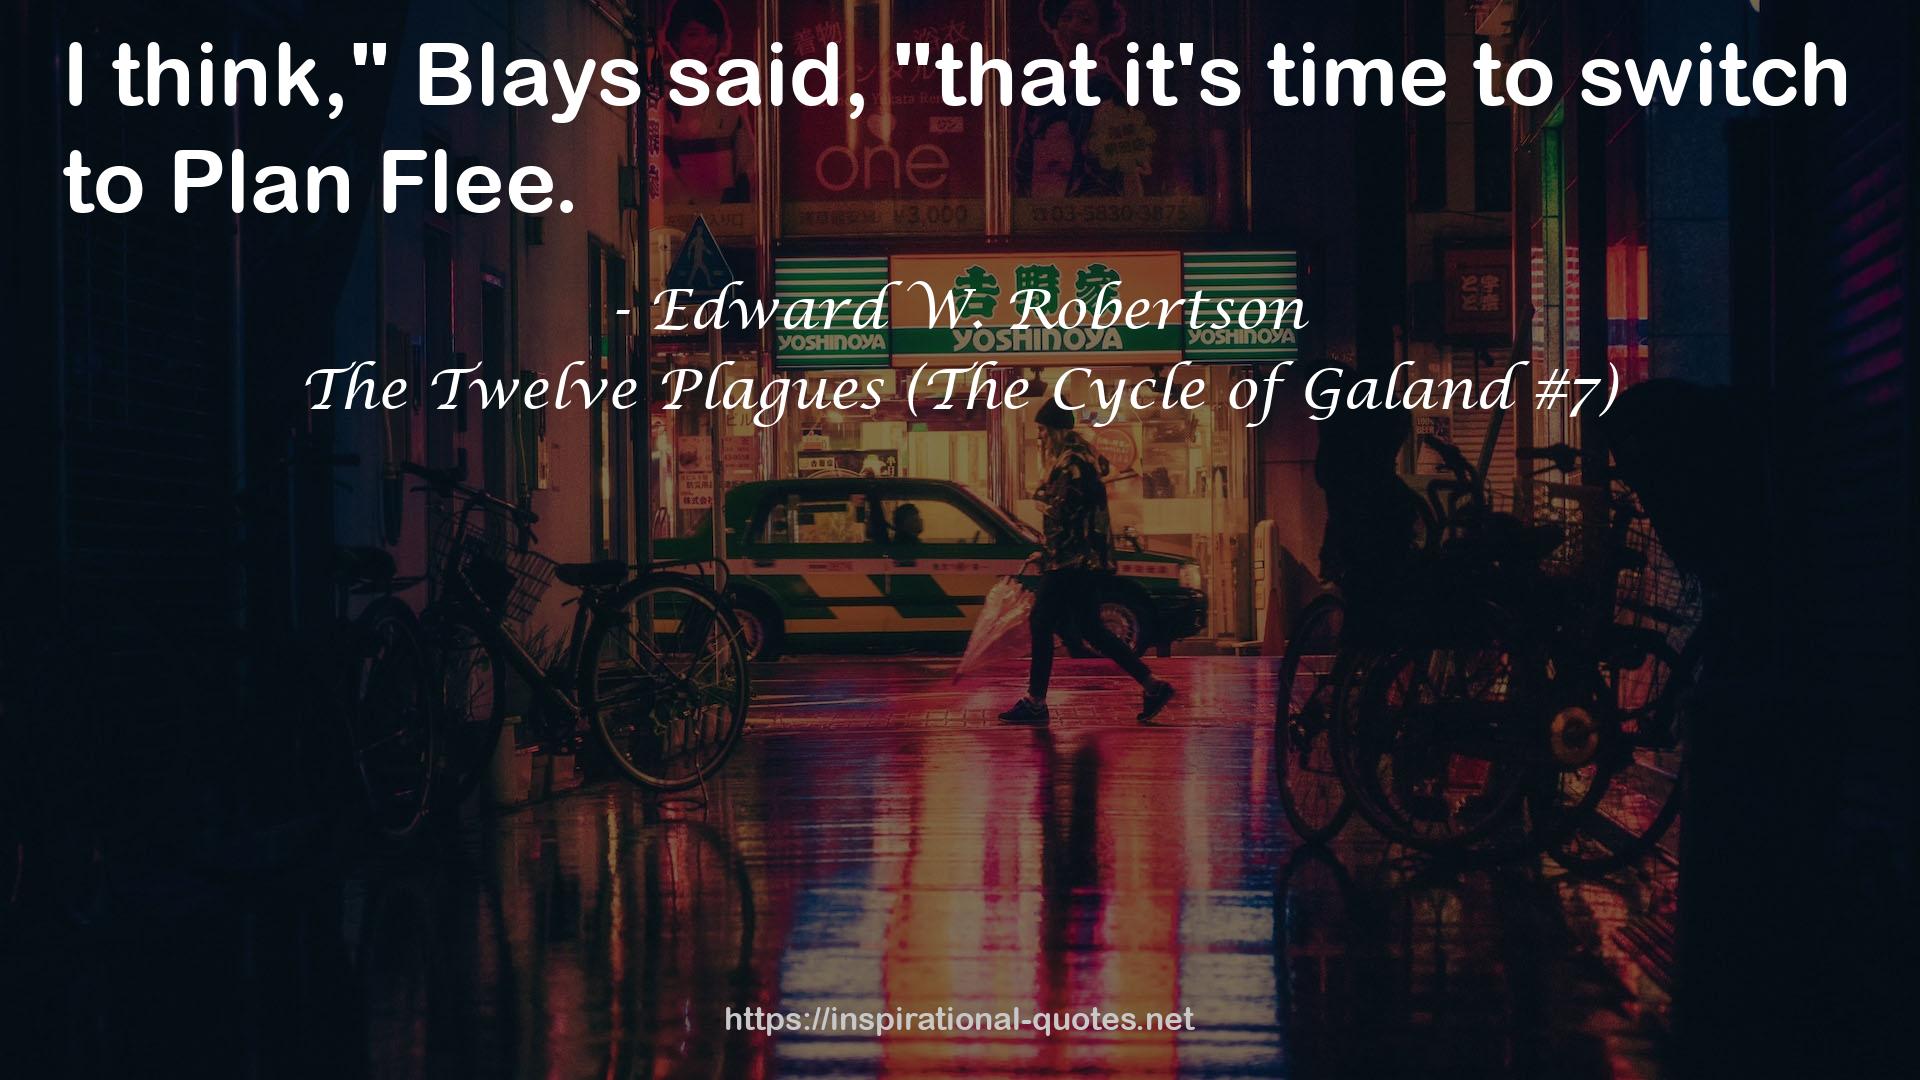 The Twelve Plagues (The Cycle of Galand #7) QUOTES